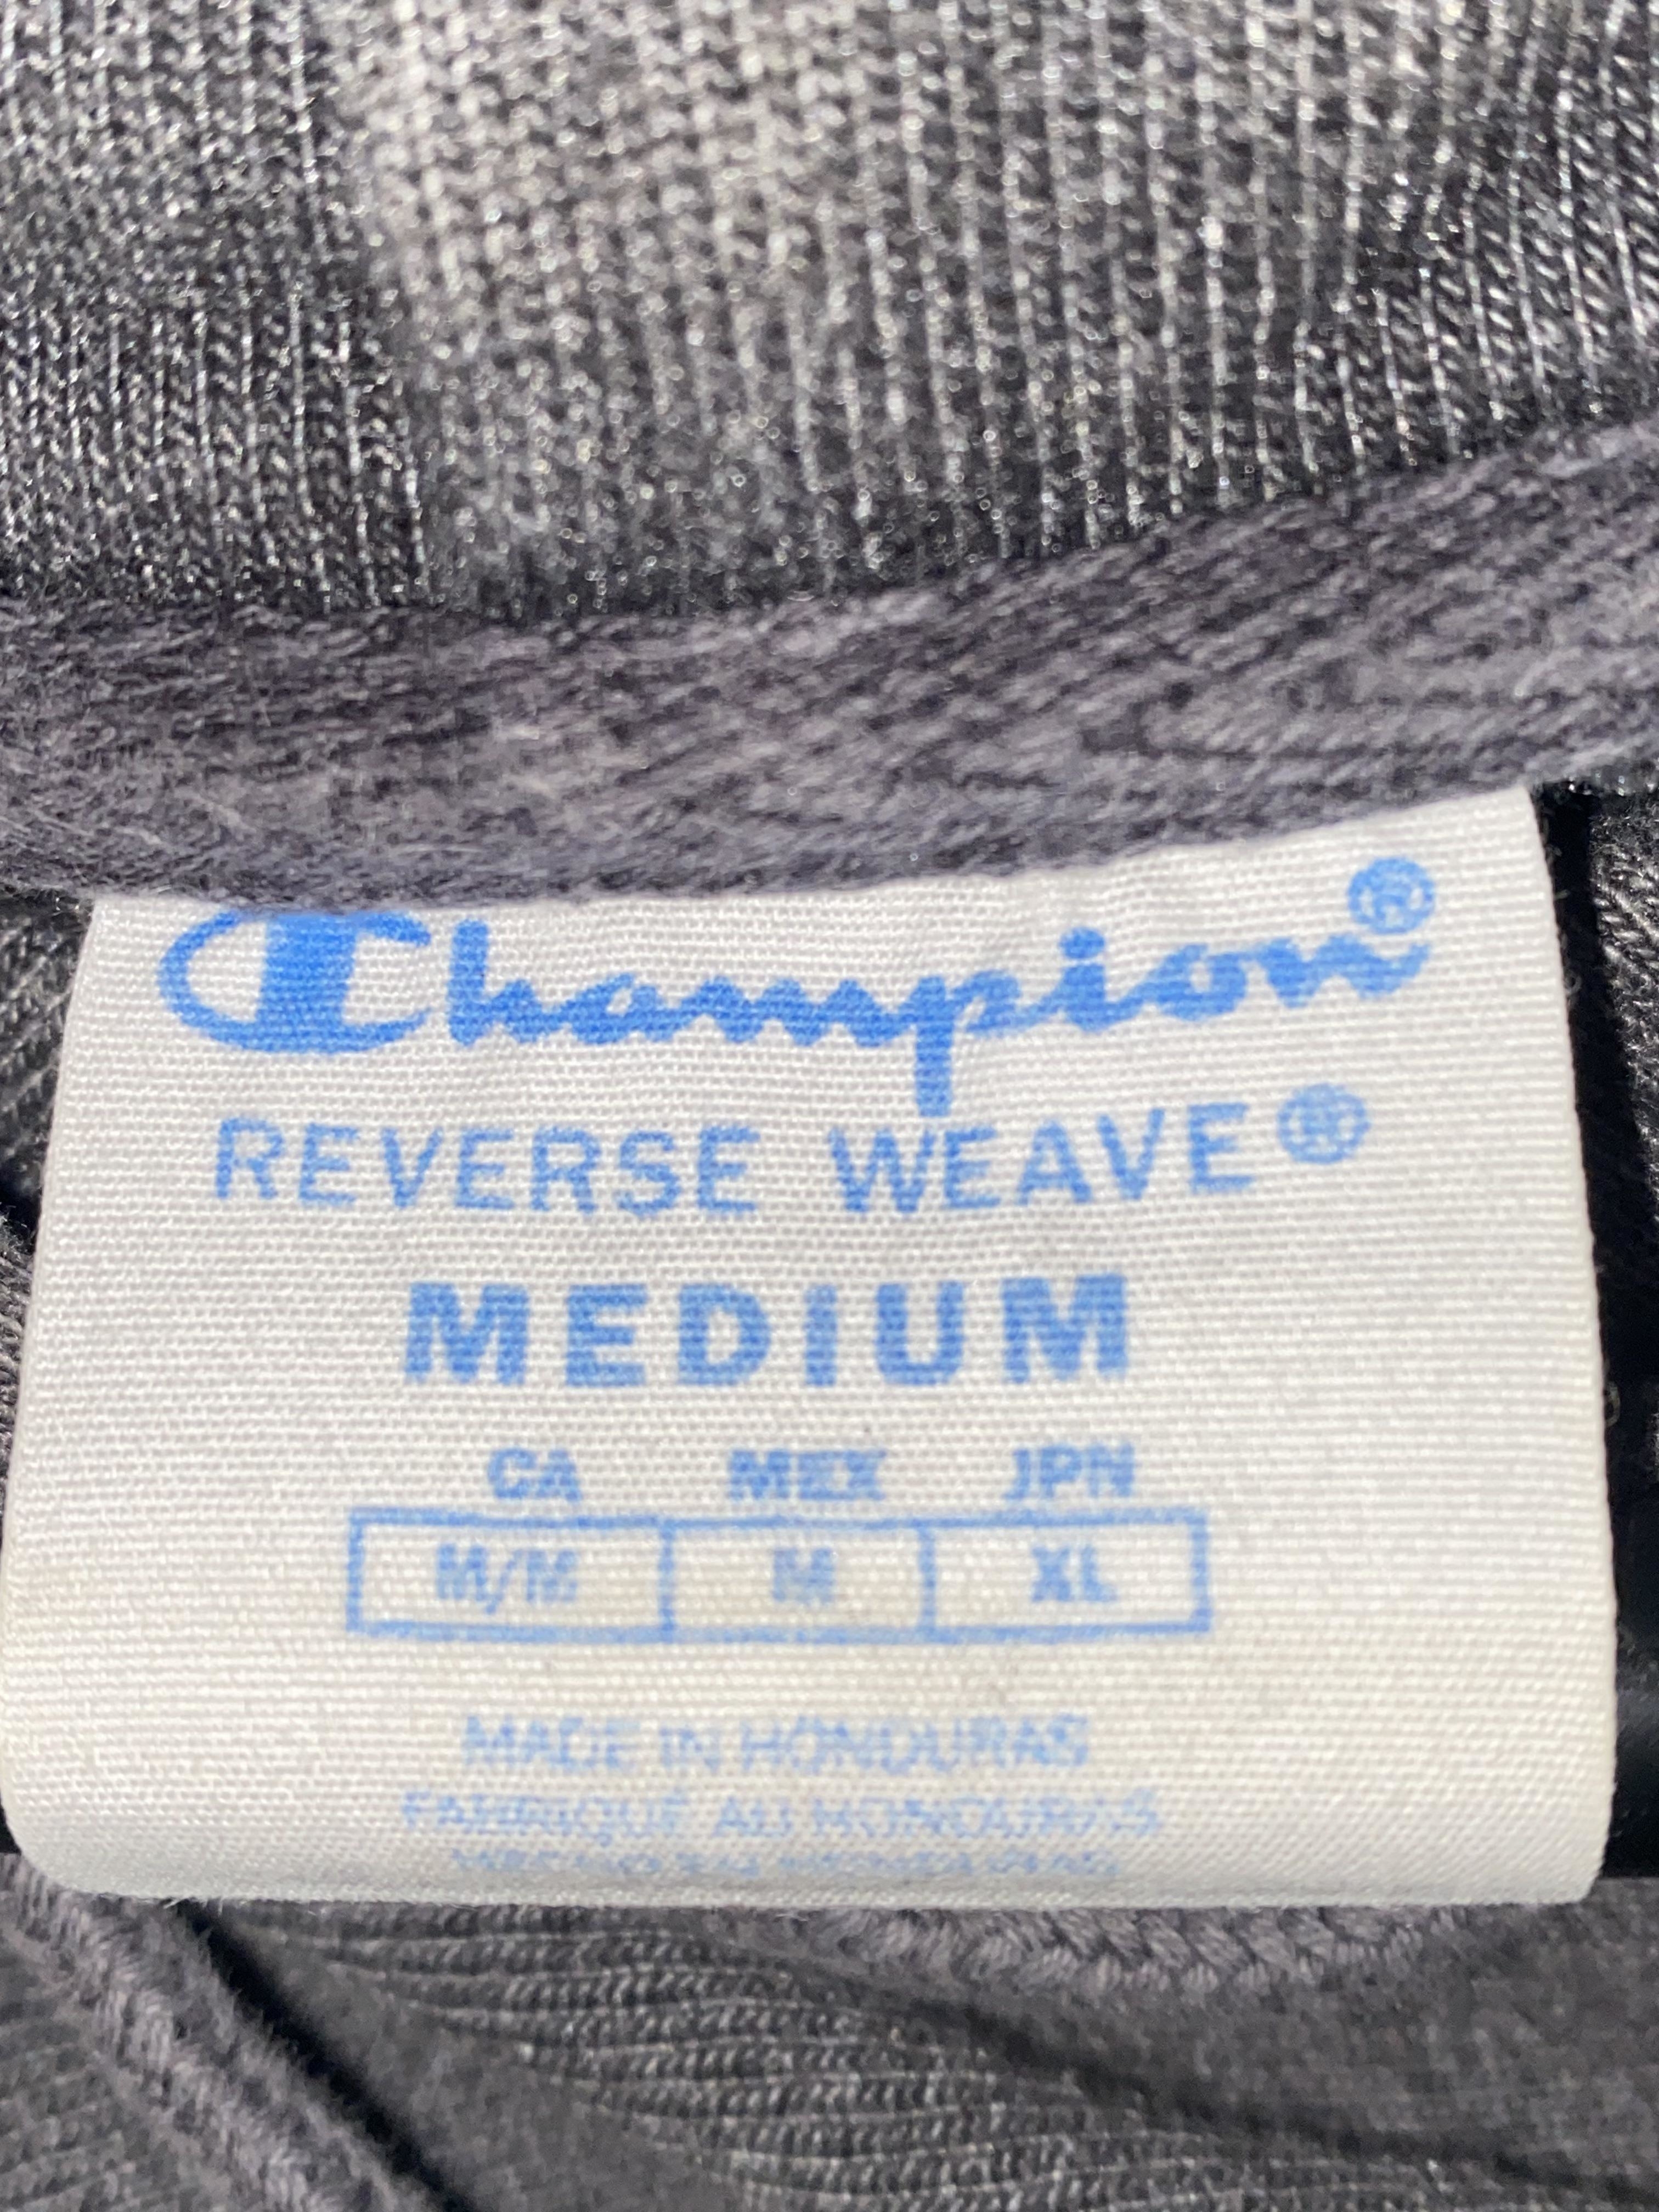 Label of a medium Champion shirt showing it&#x27;s M/M in Canada, M in Mexico, and XL in Japan